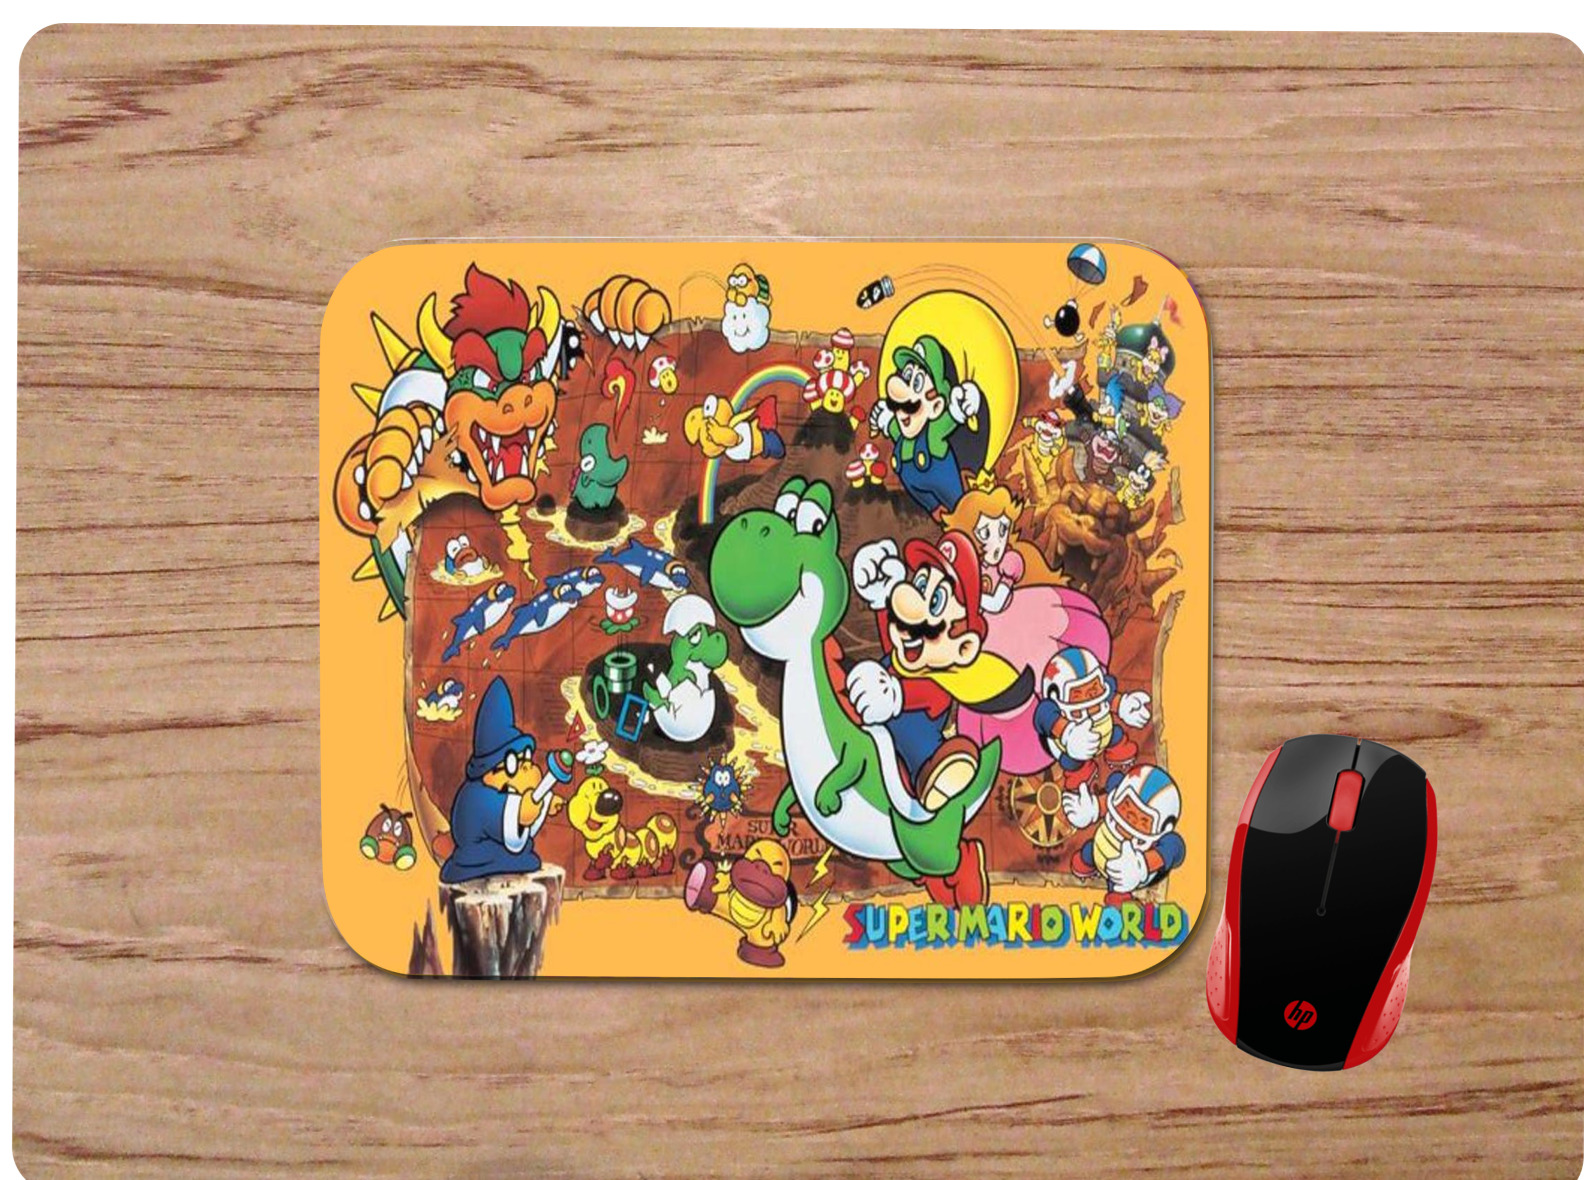 SUPER MARIO WORLD CHARACTER COLLAGE ART CUSTOM MOUSE PAD DESK MAT PC GAMING GIFT